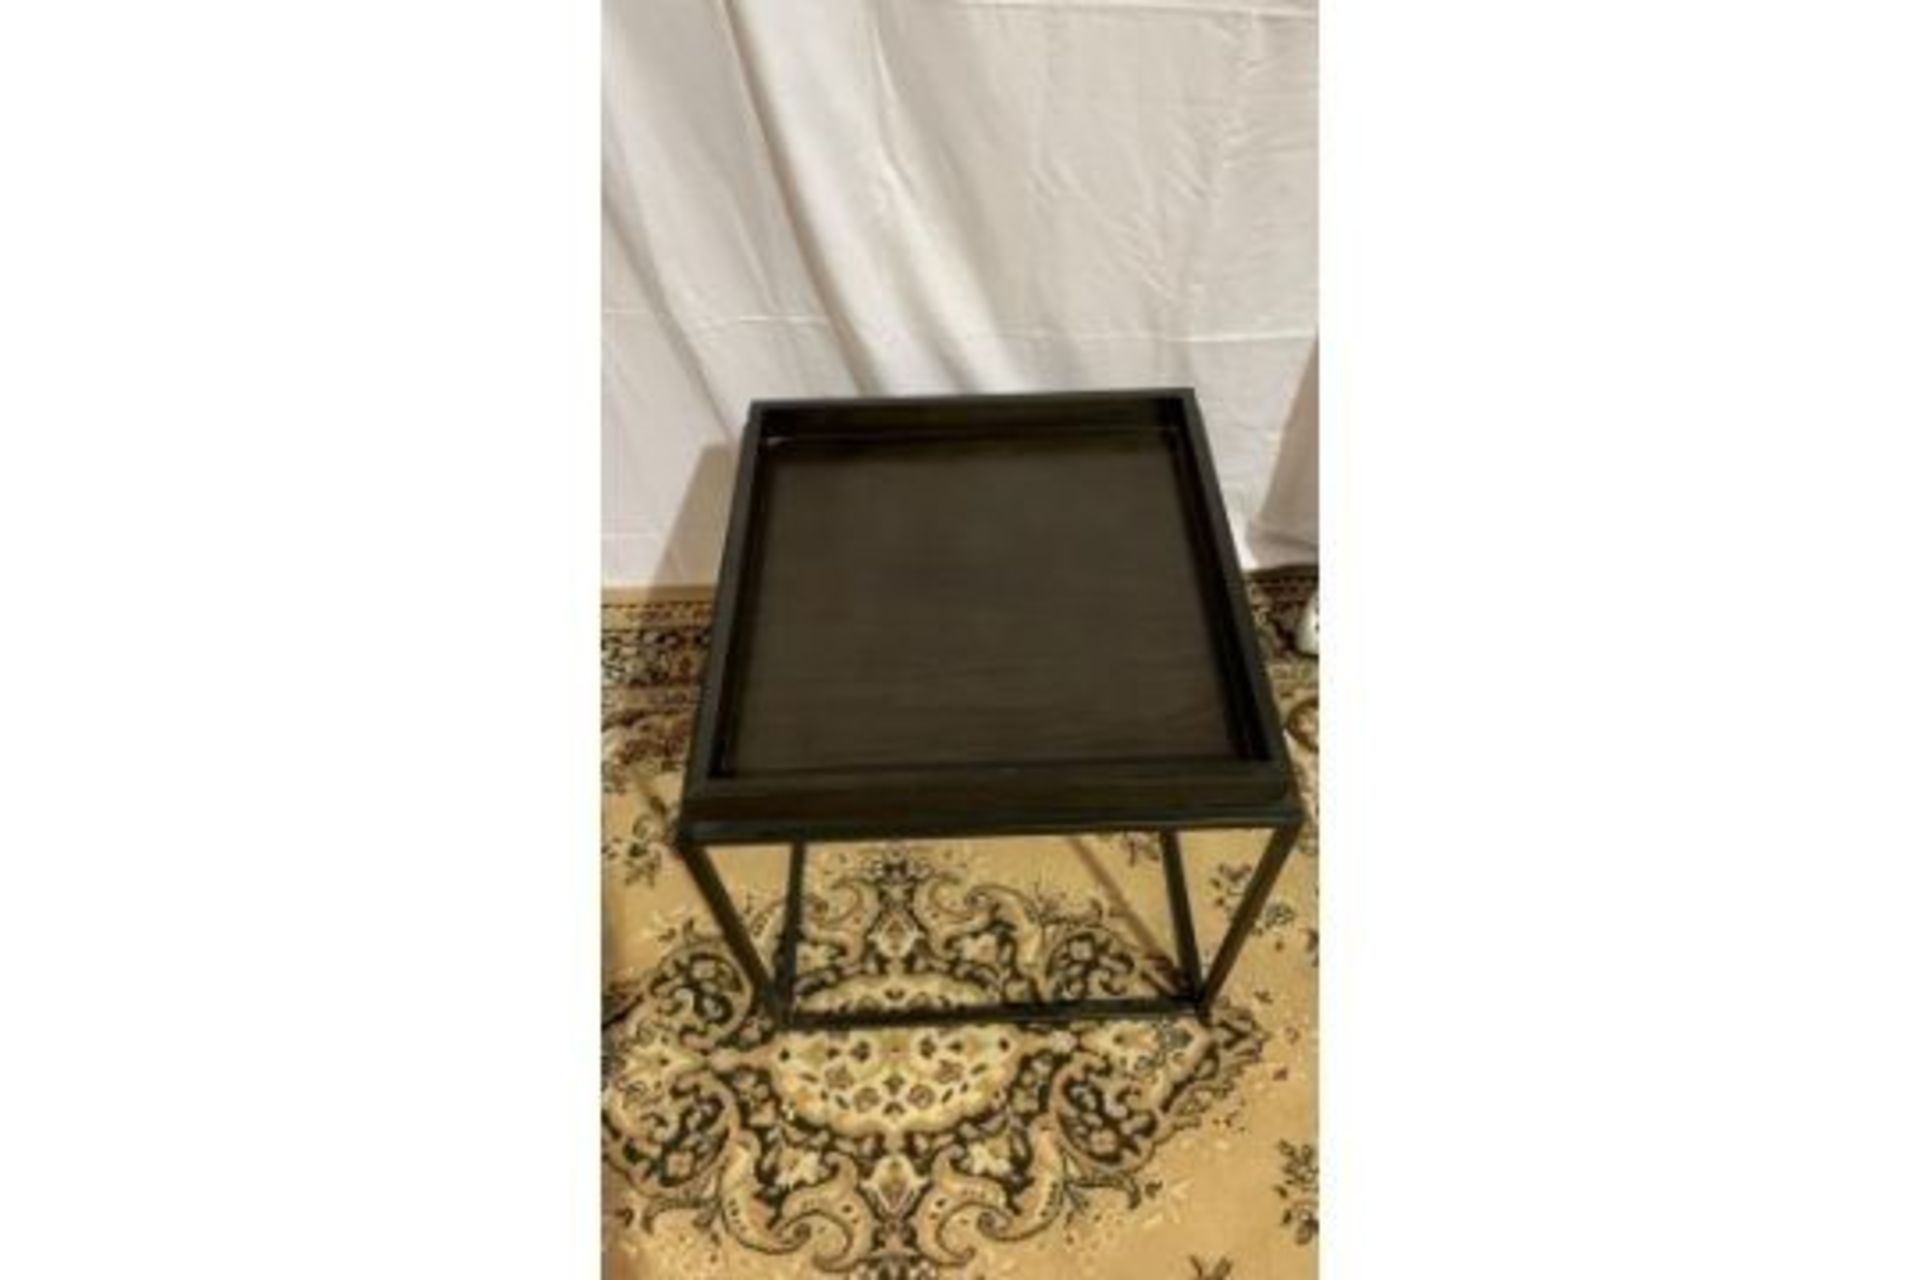 Forden Tray Side Table Black The Simple Angular Black Metal Frame Allows A Clear View Of The Floor - Image 2 of 3